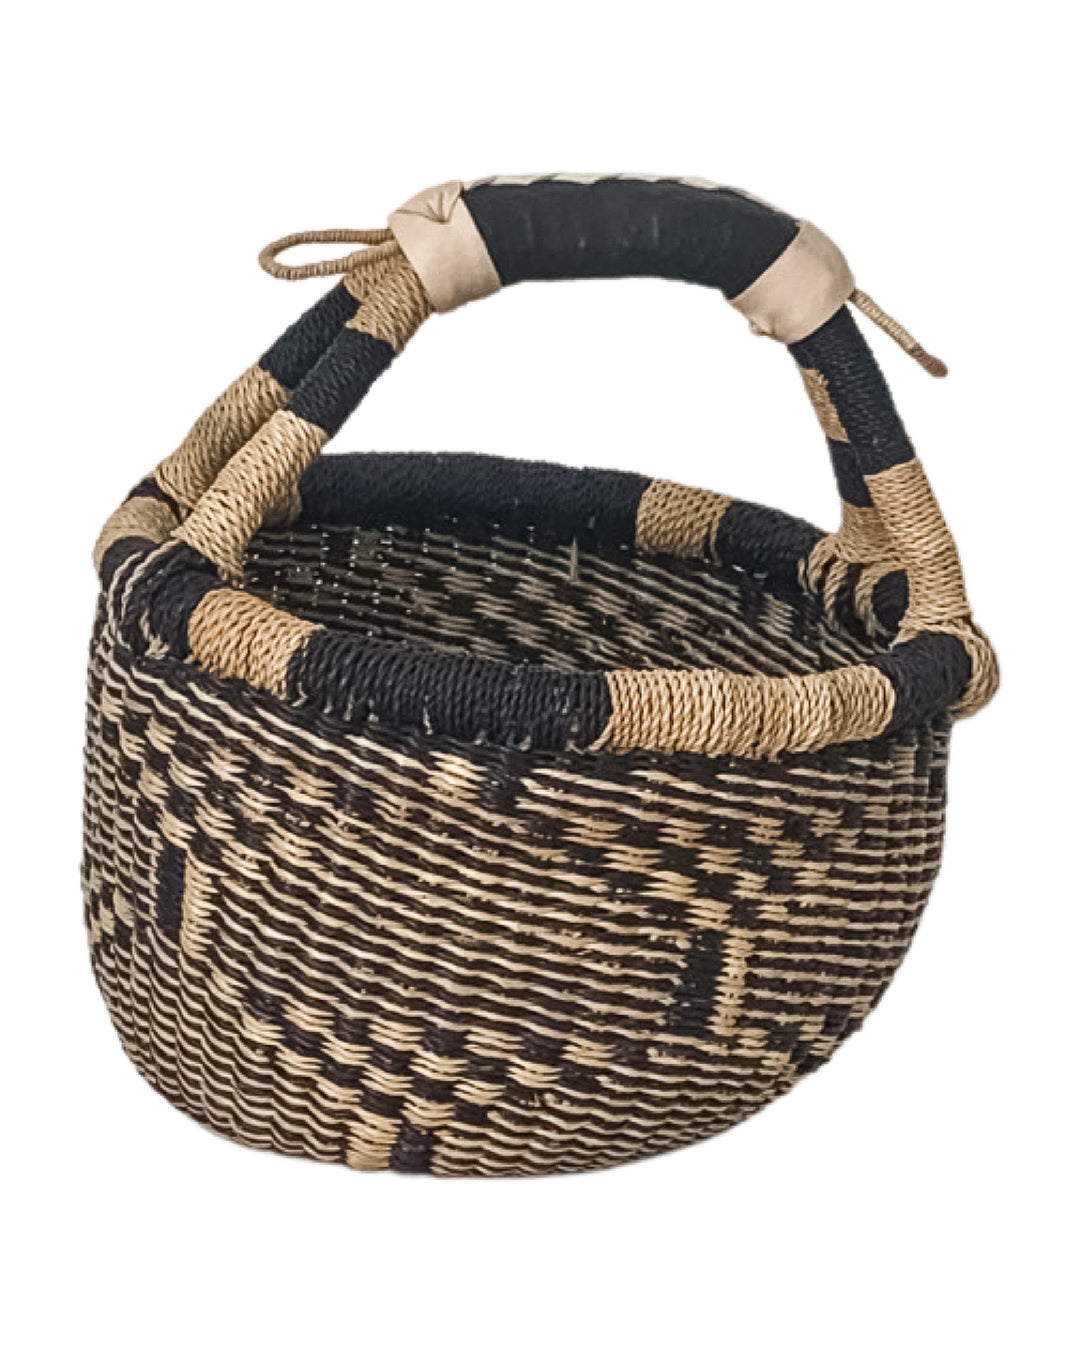 Hand-Woven Small Round Basket